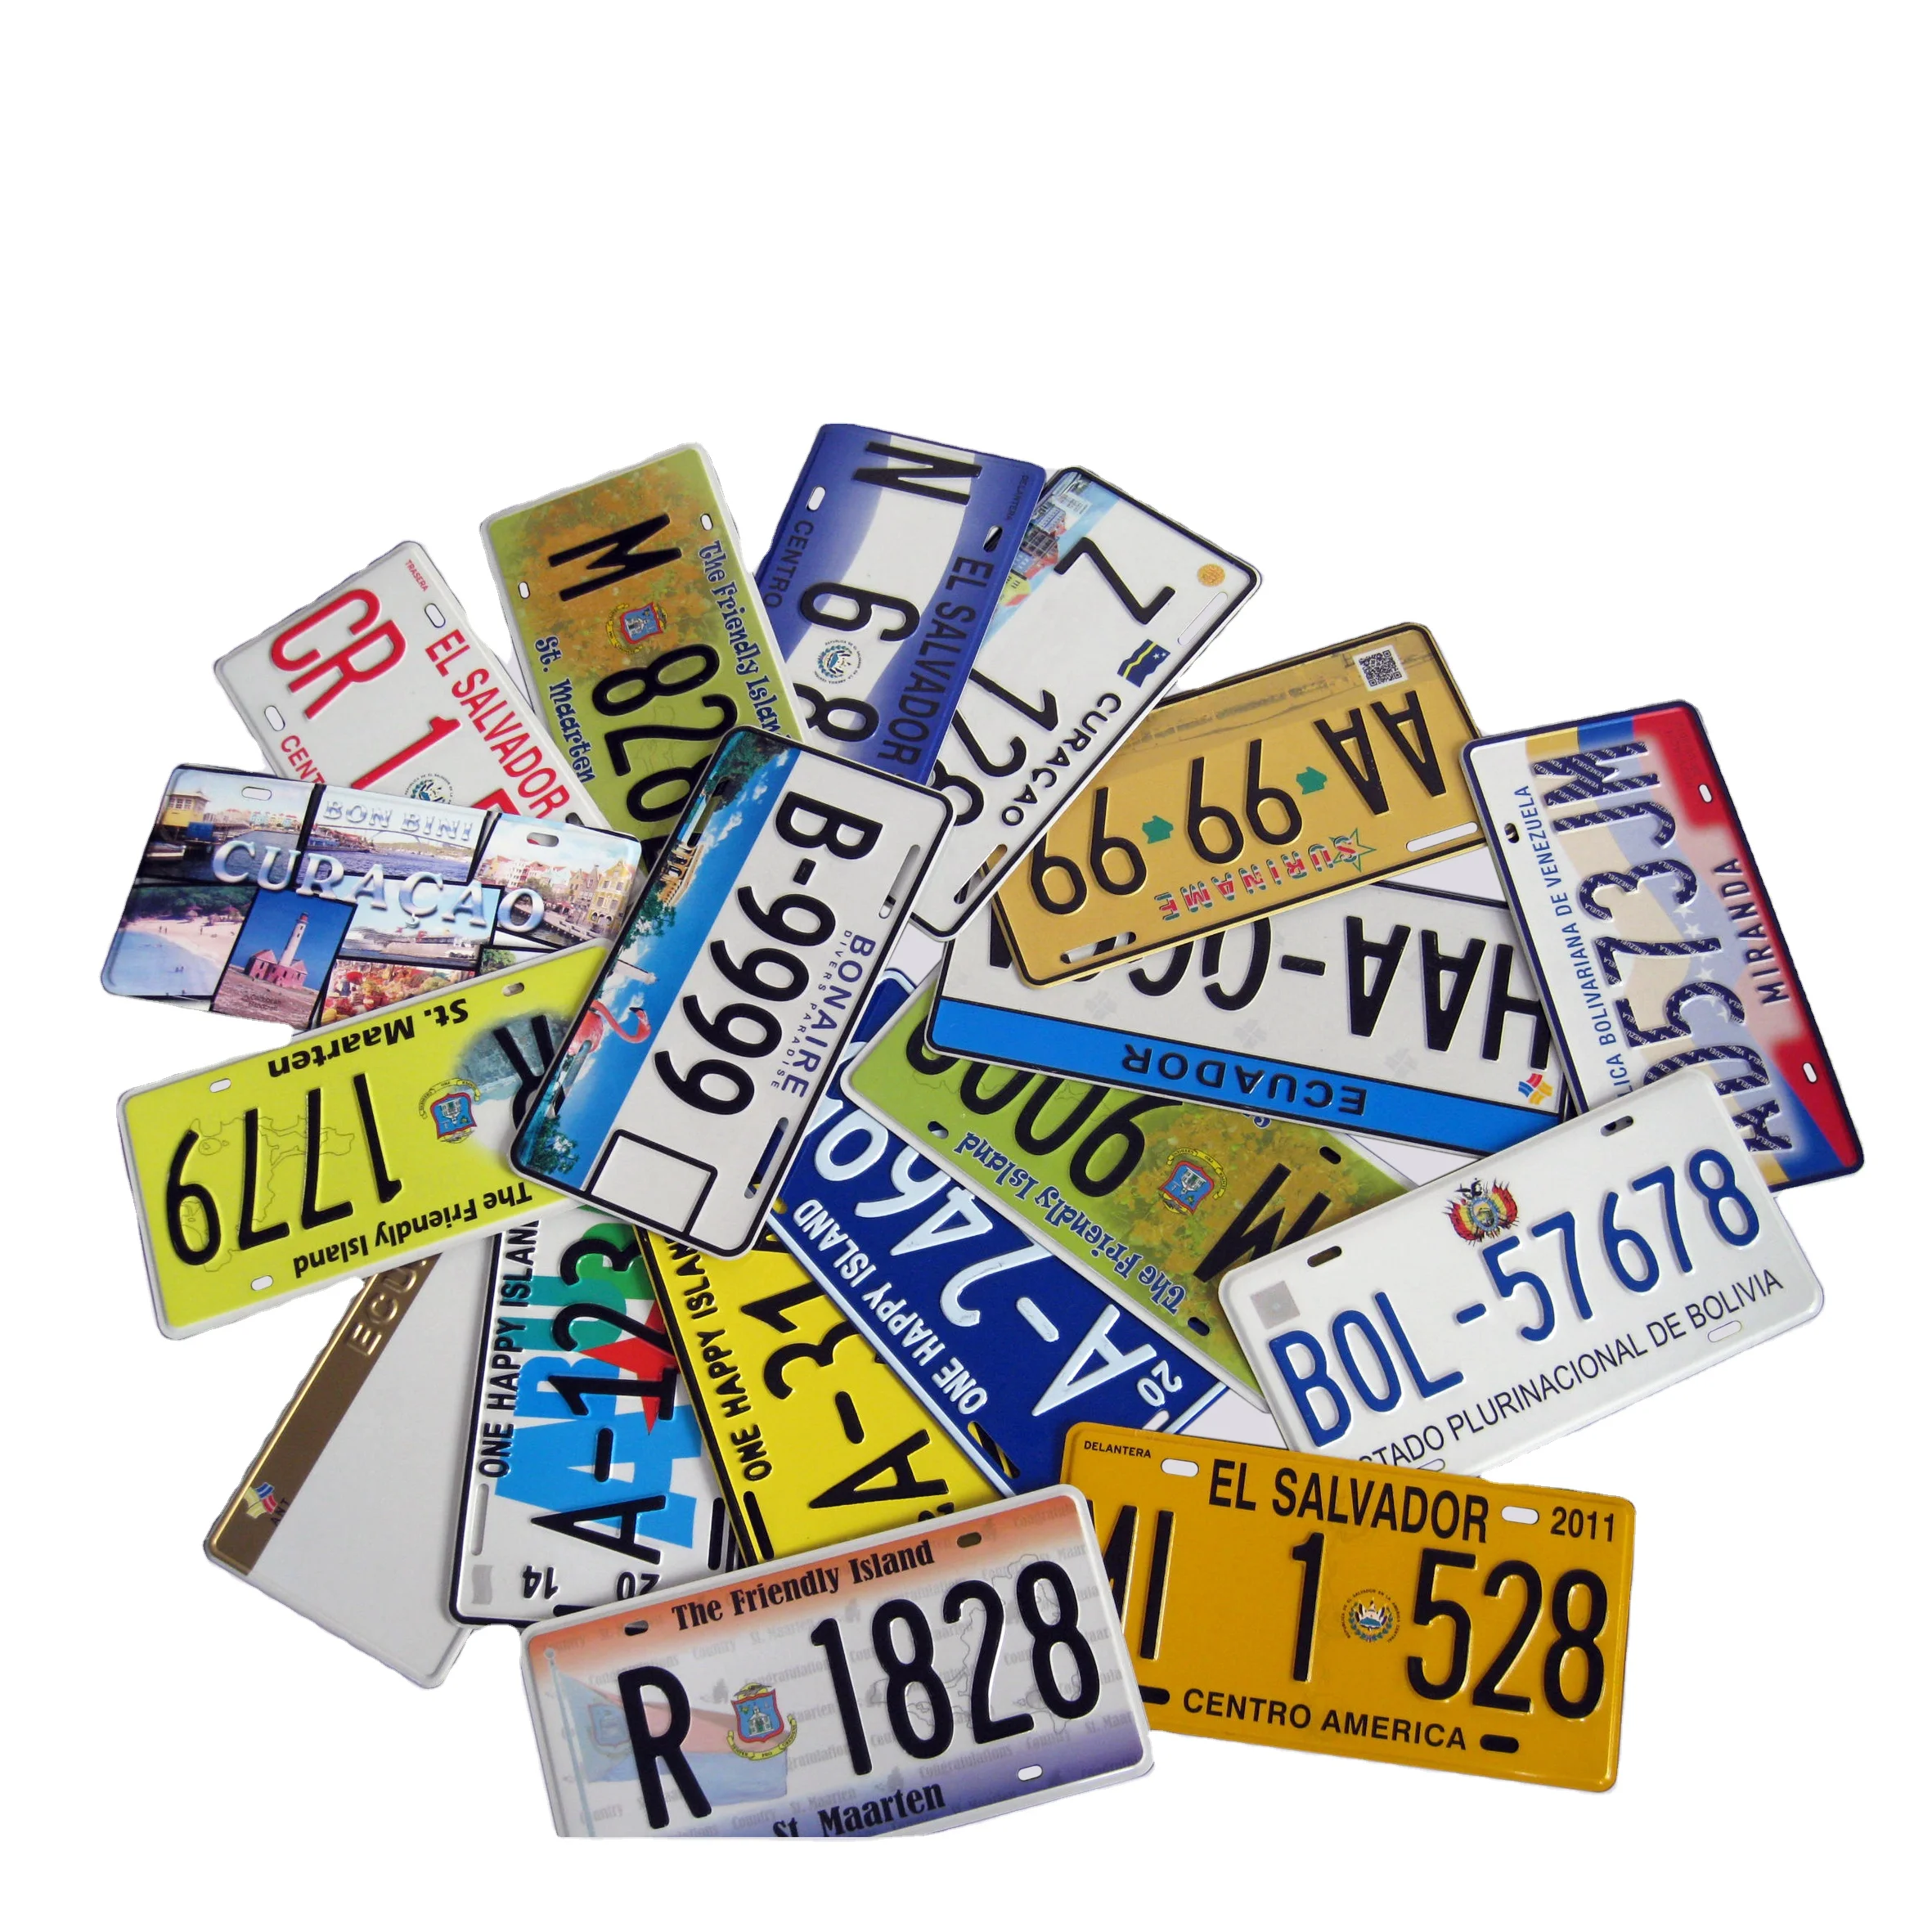 HIGH QUALITY CAR LICENSE PLATES, SECURITY NUMBER PLATES, CUSTOM LOGO VEHICLE PLATES FOR GOVERNMENT